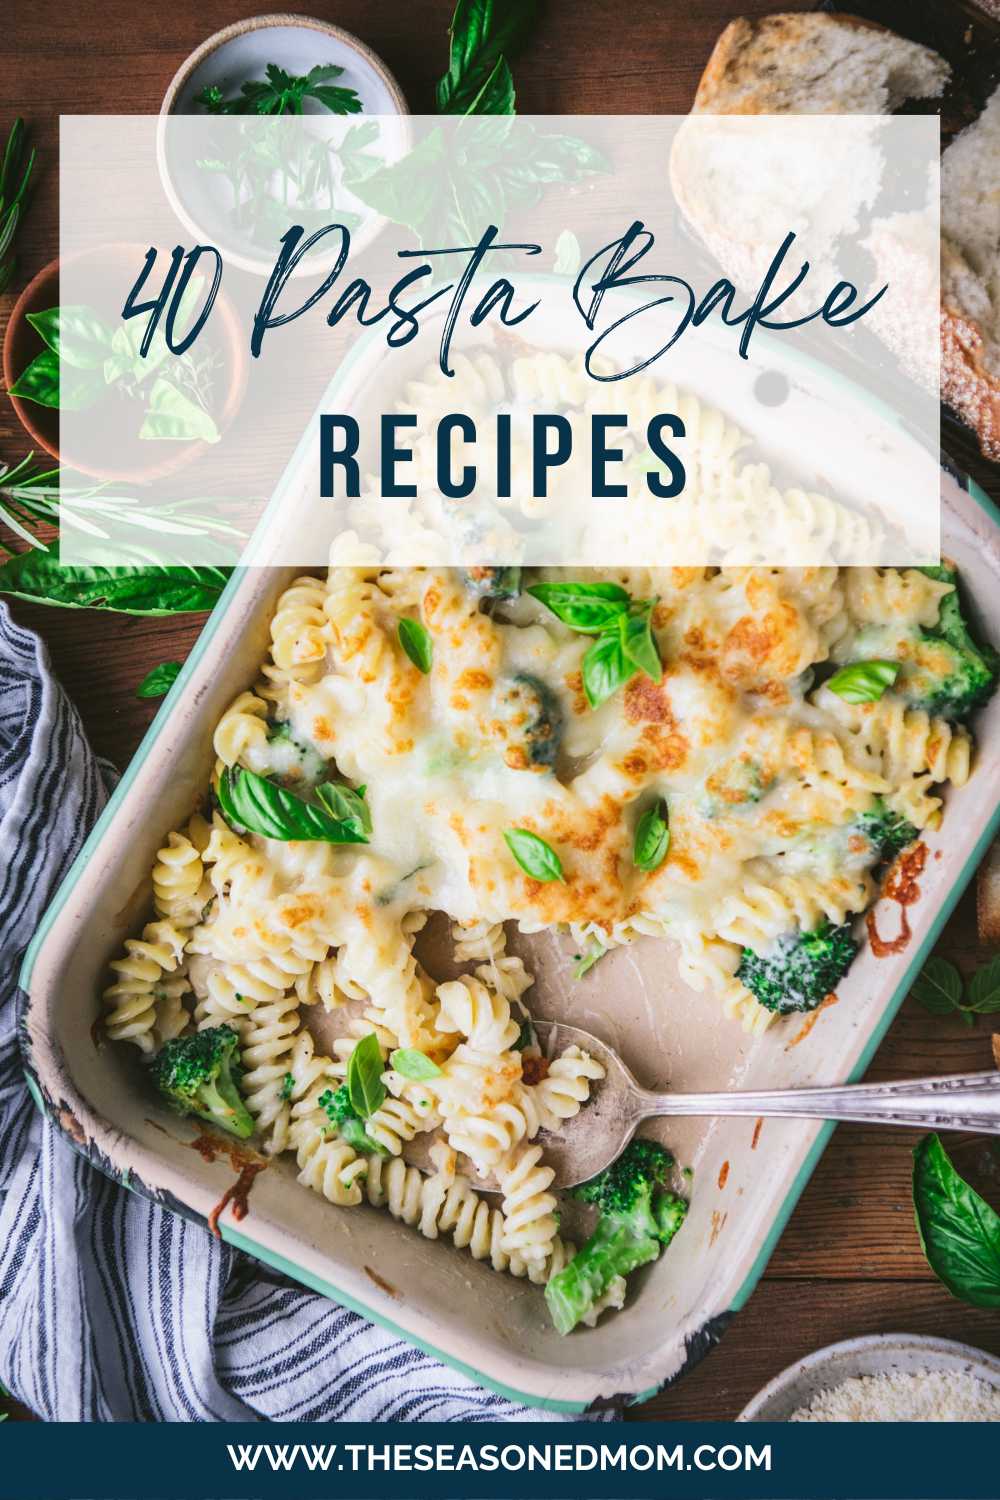 Baked pasta recipes collage with text overlay